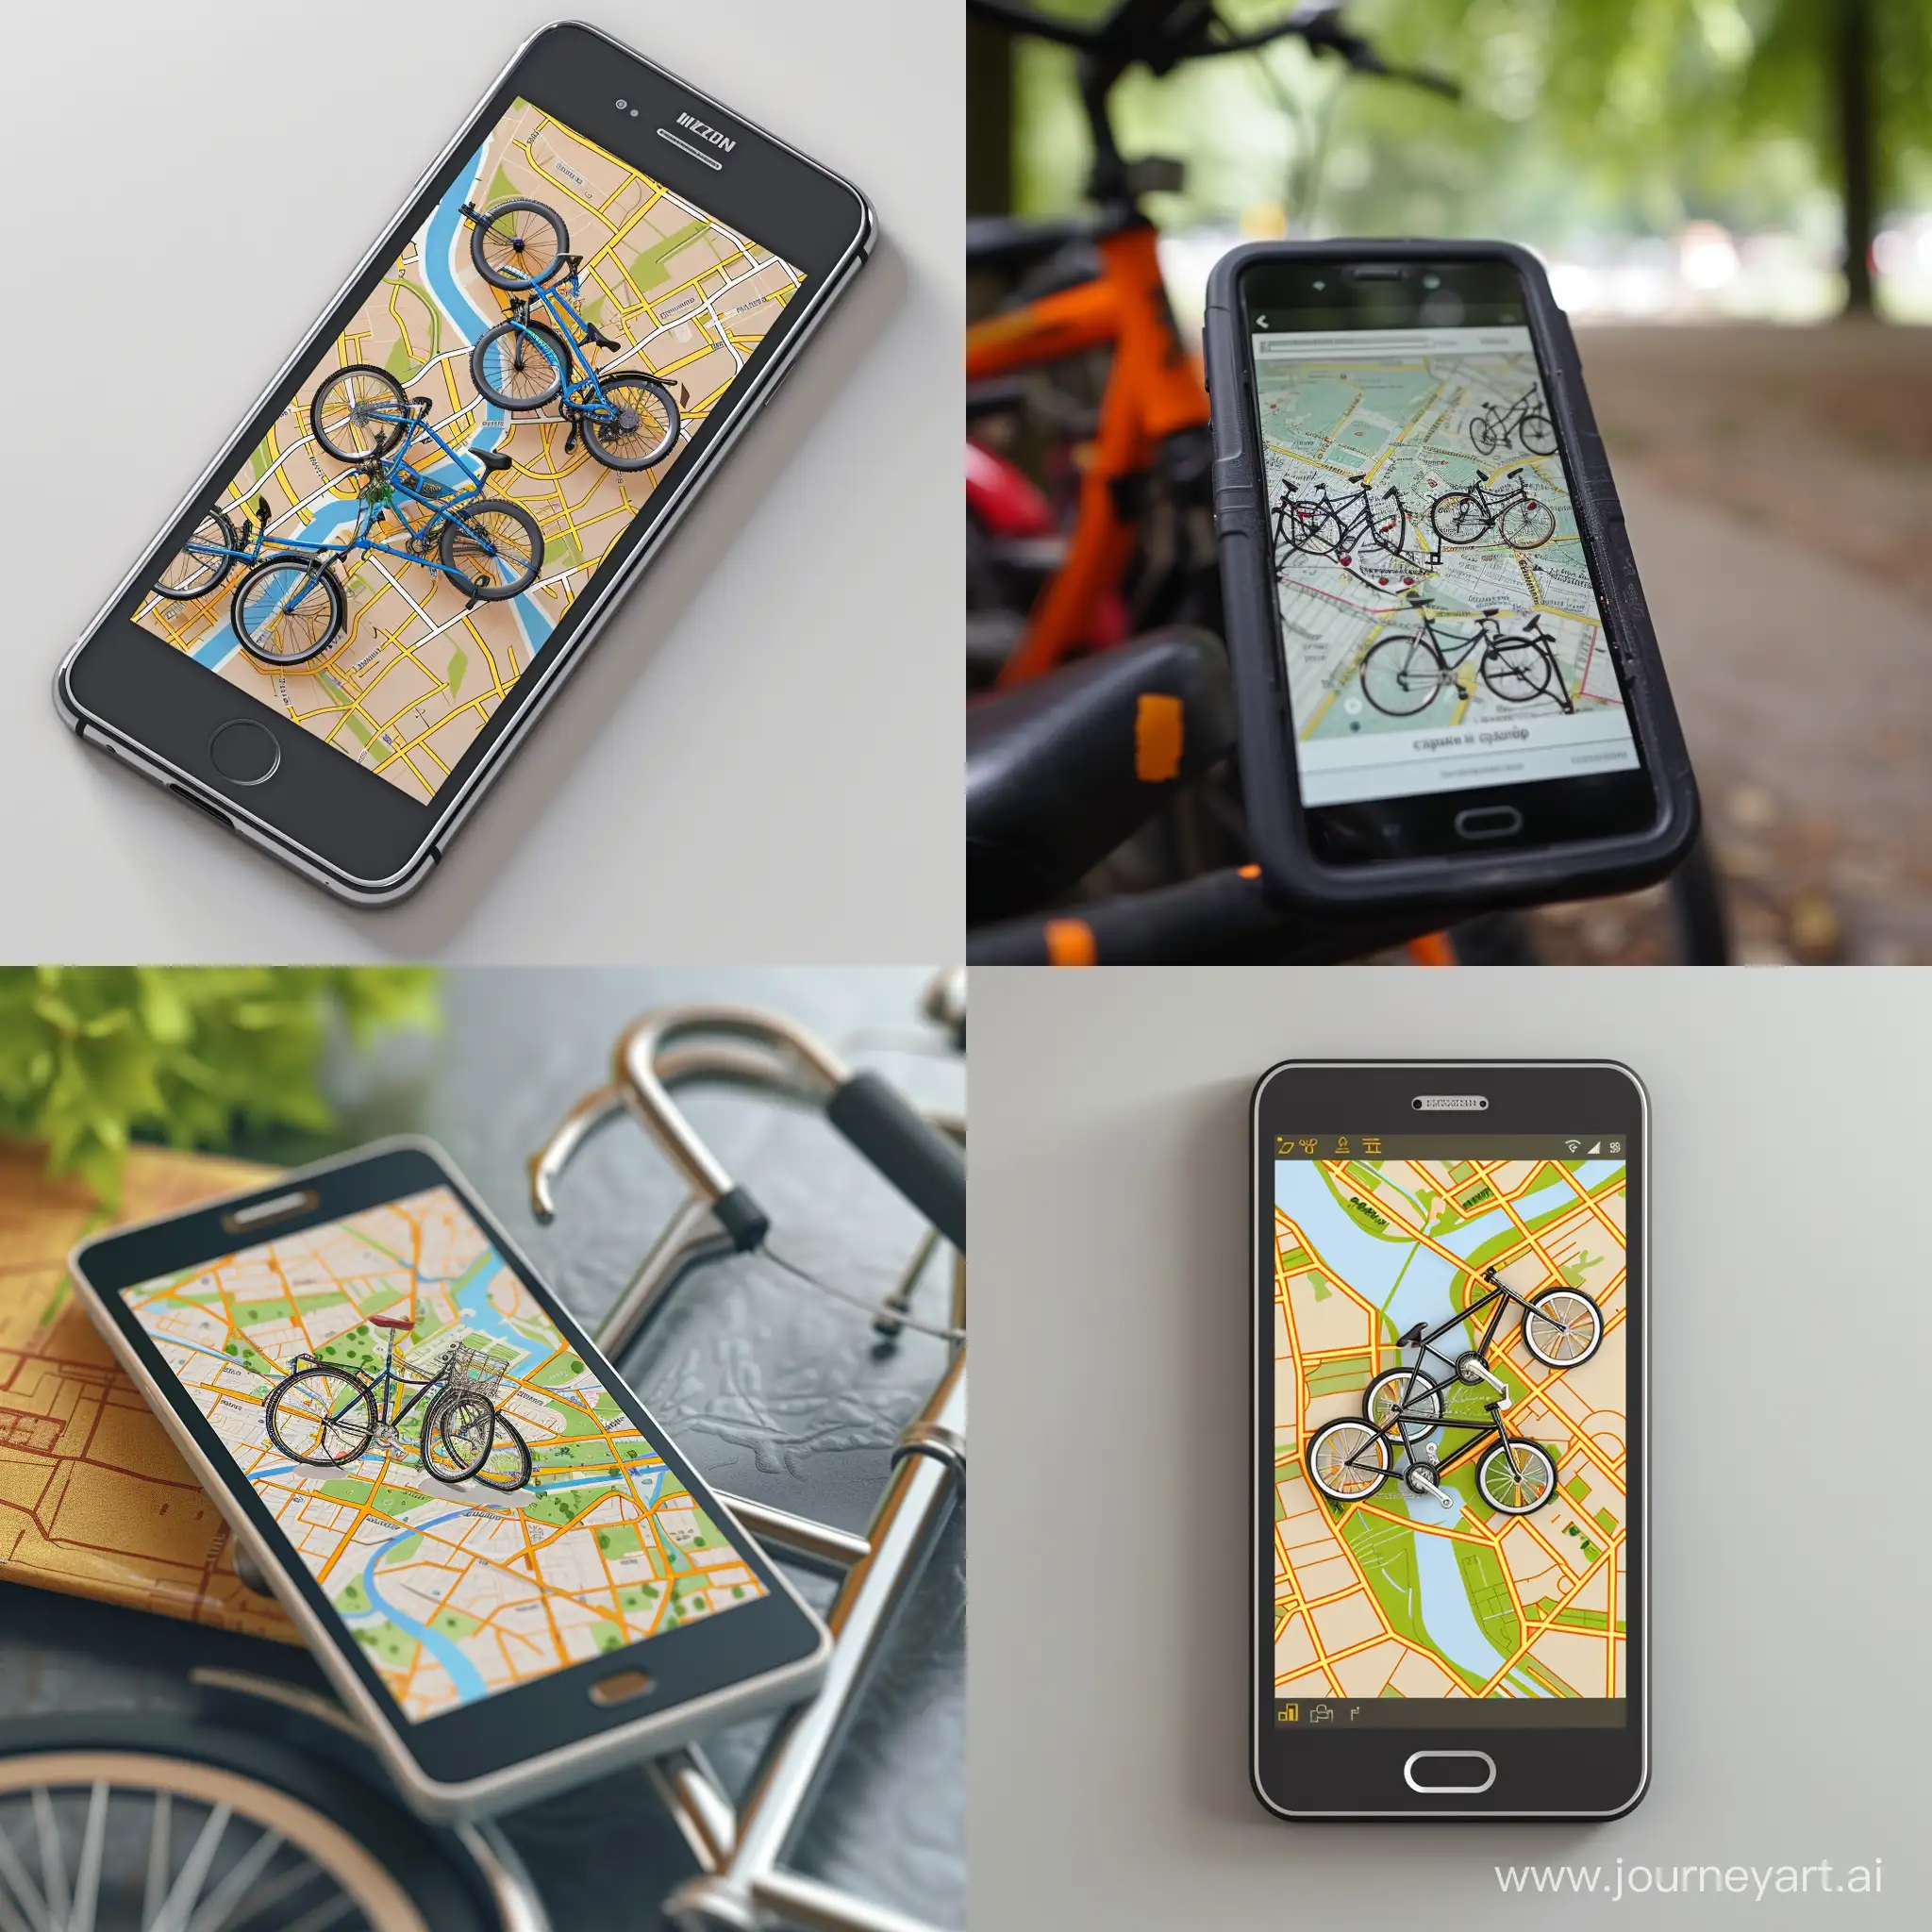 Mobile-Phone-Map-for-Bike-Rental-Stations